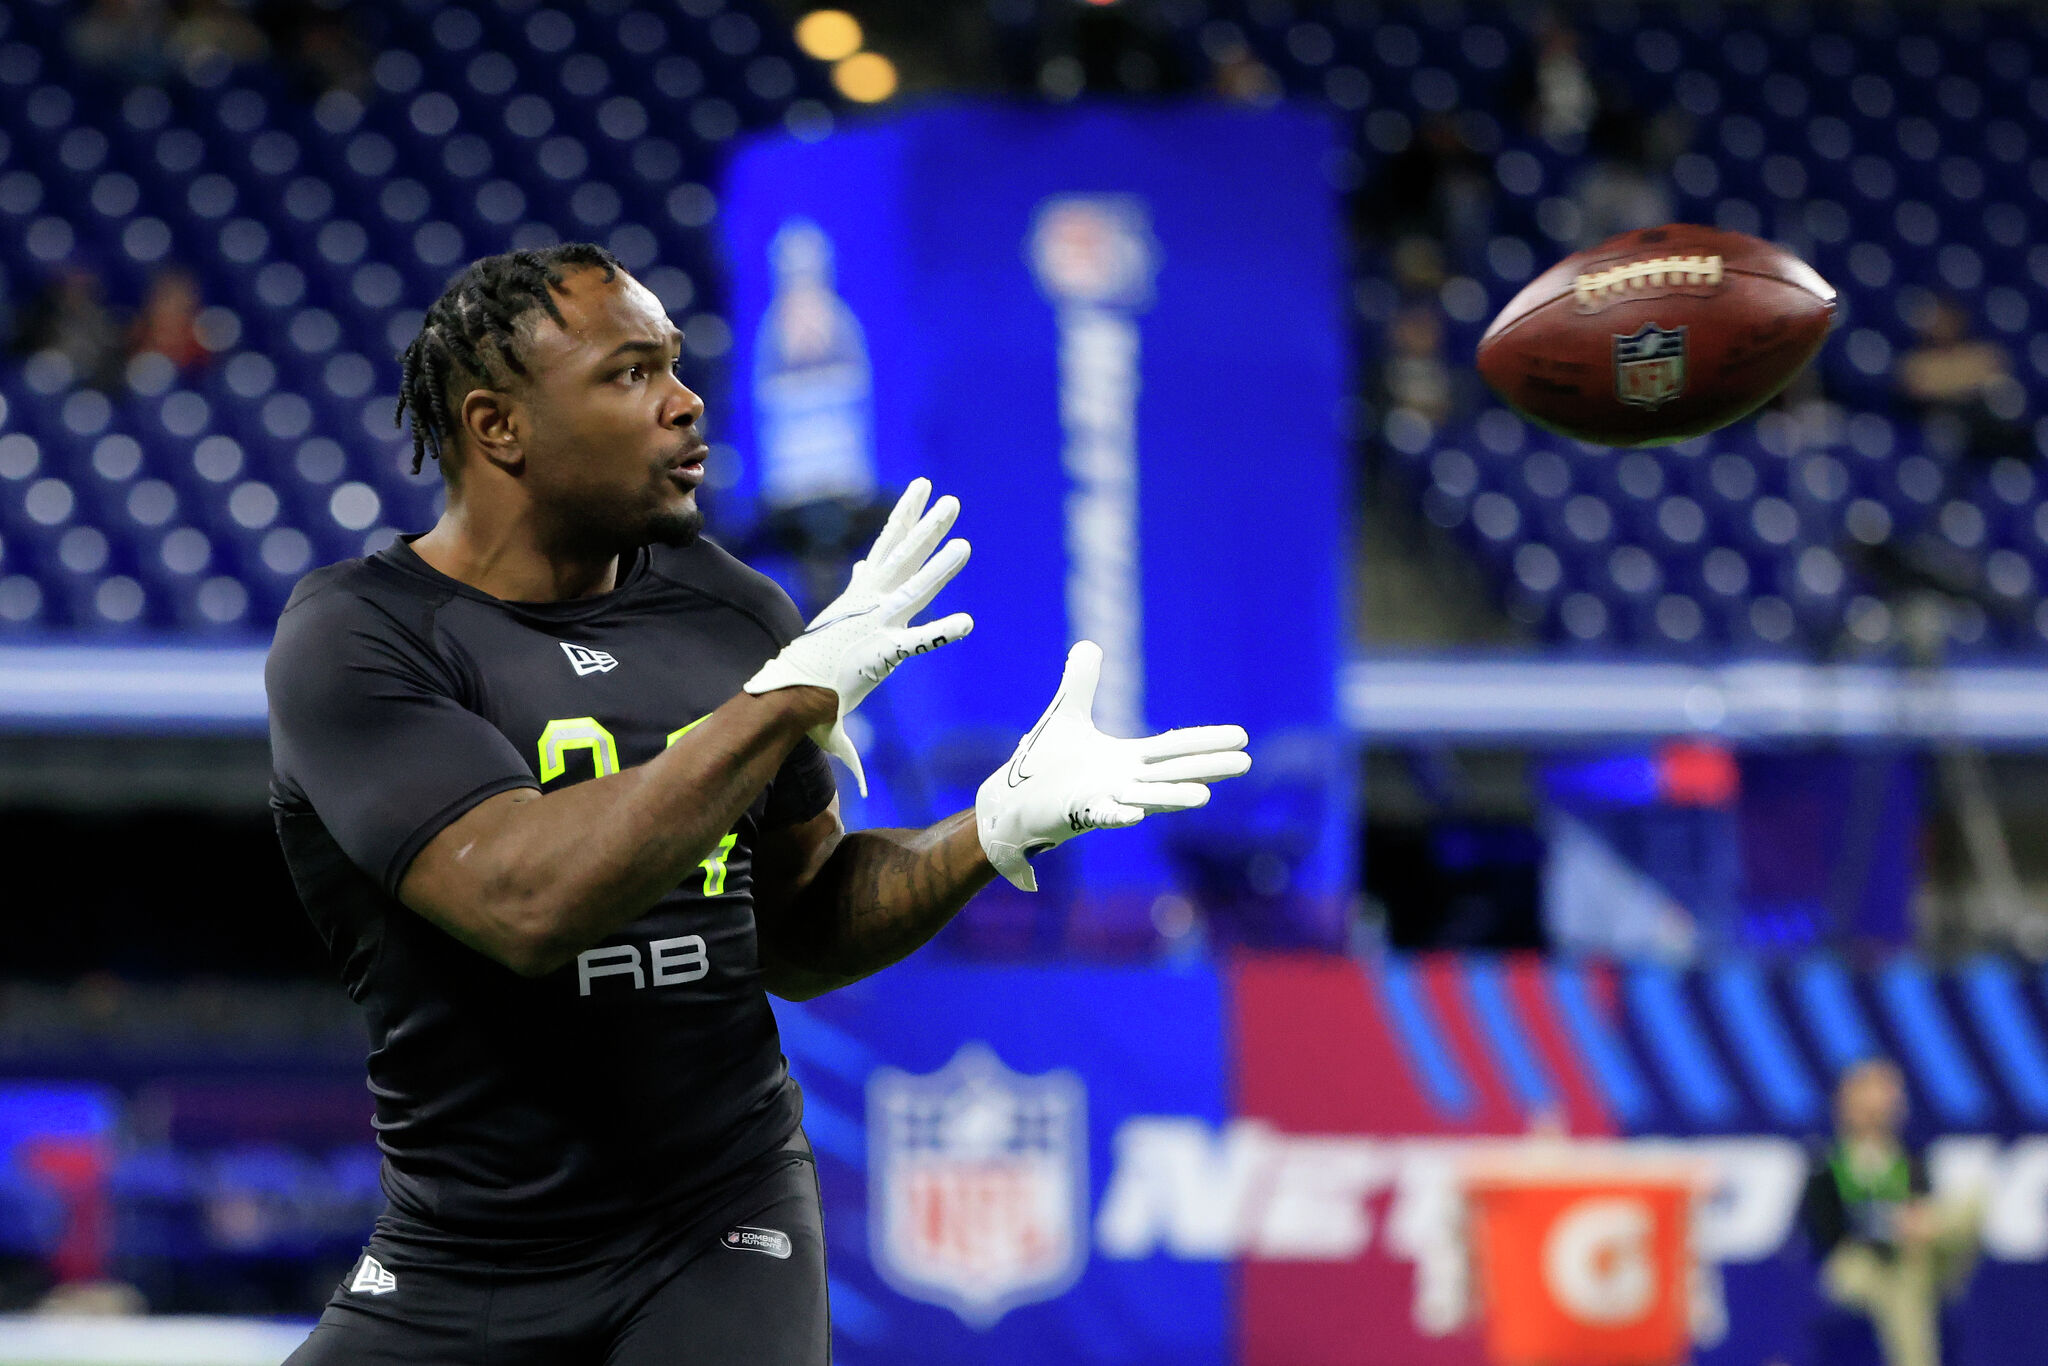 NFL scouting combine How to watch on live TV and streaming